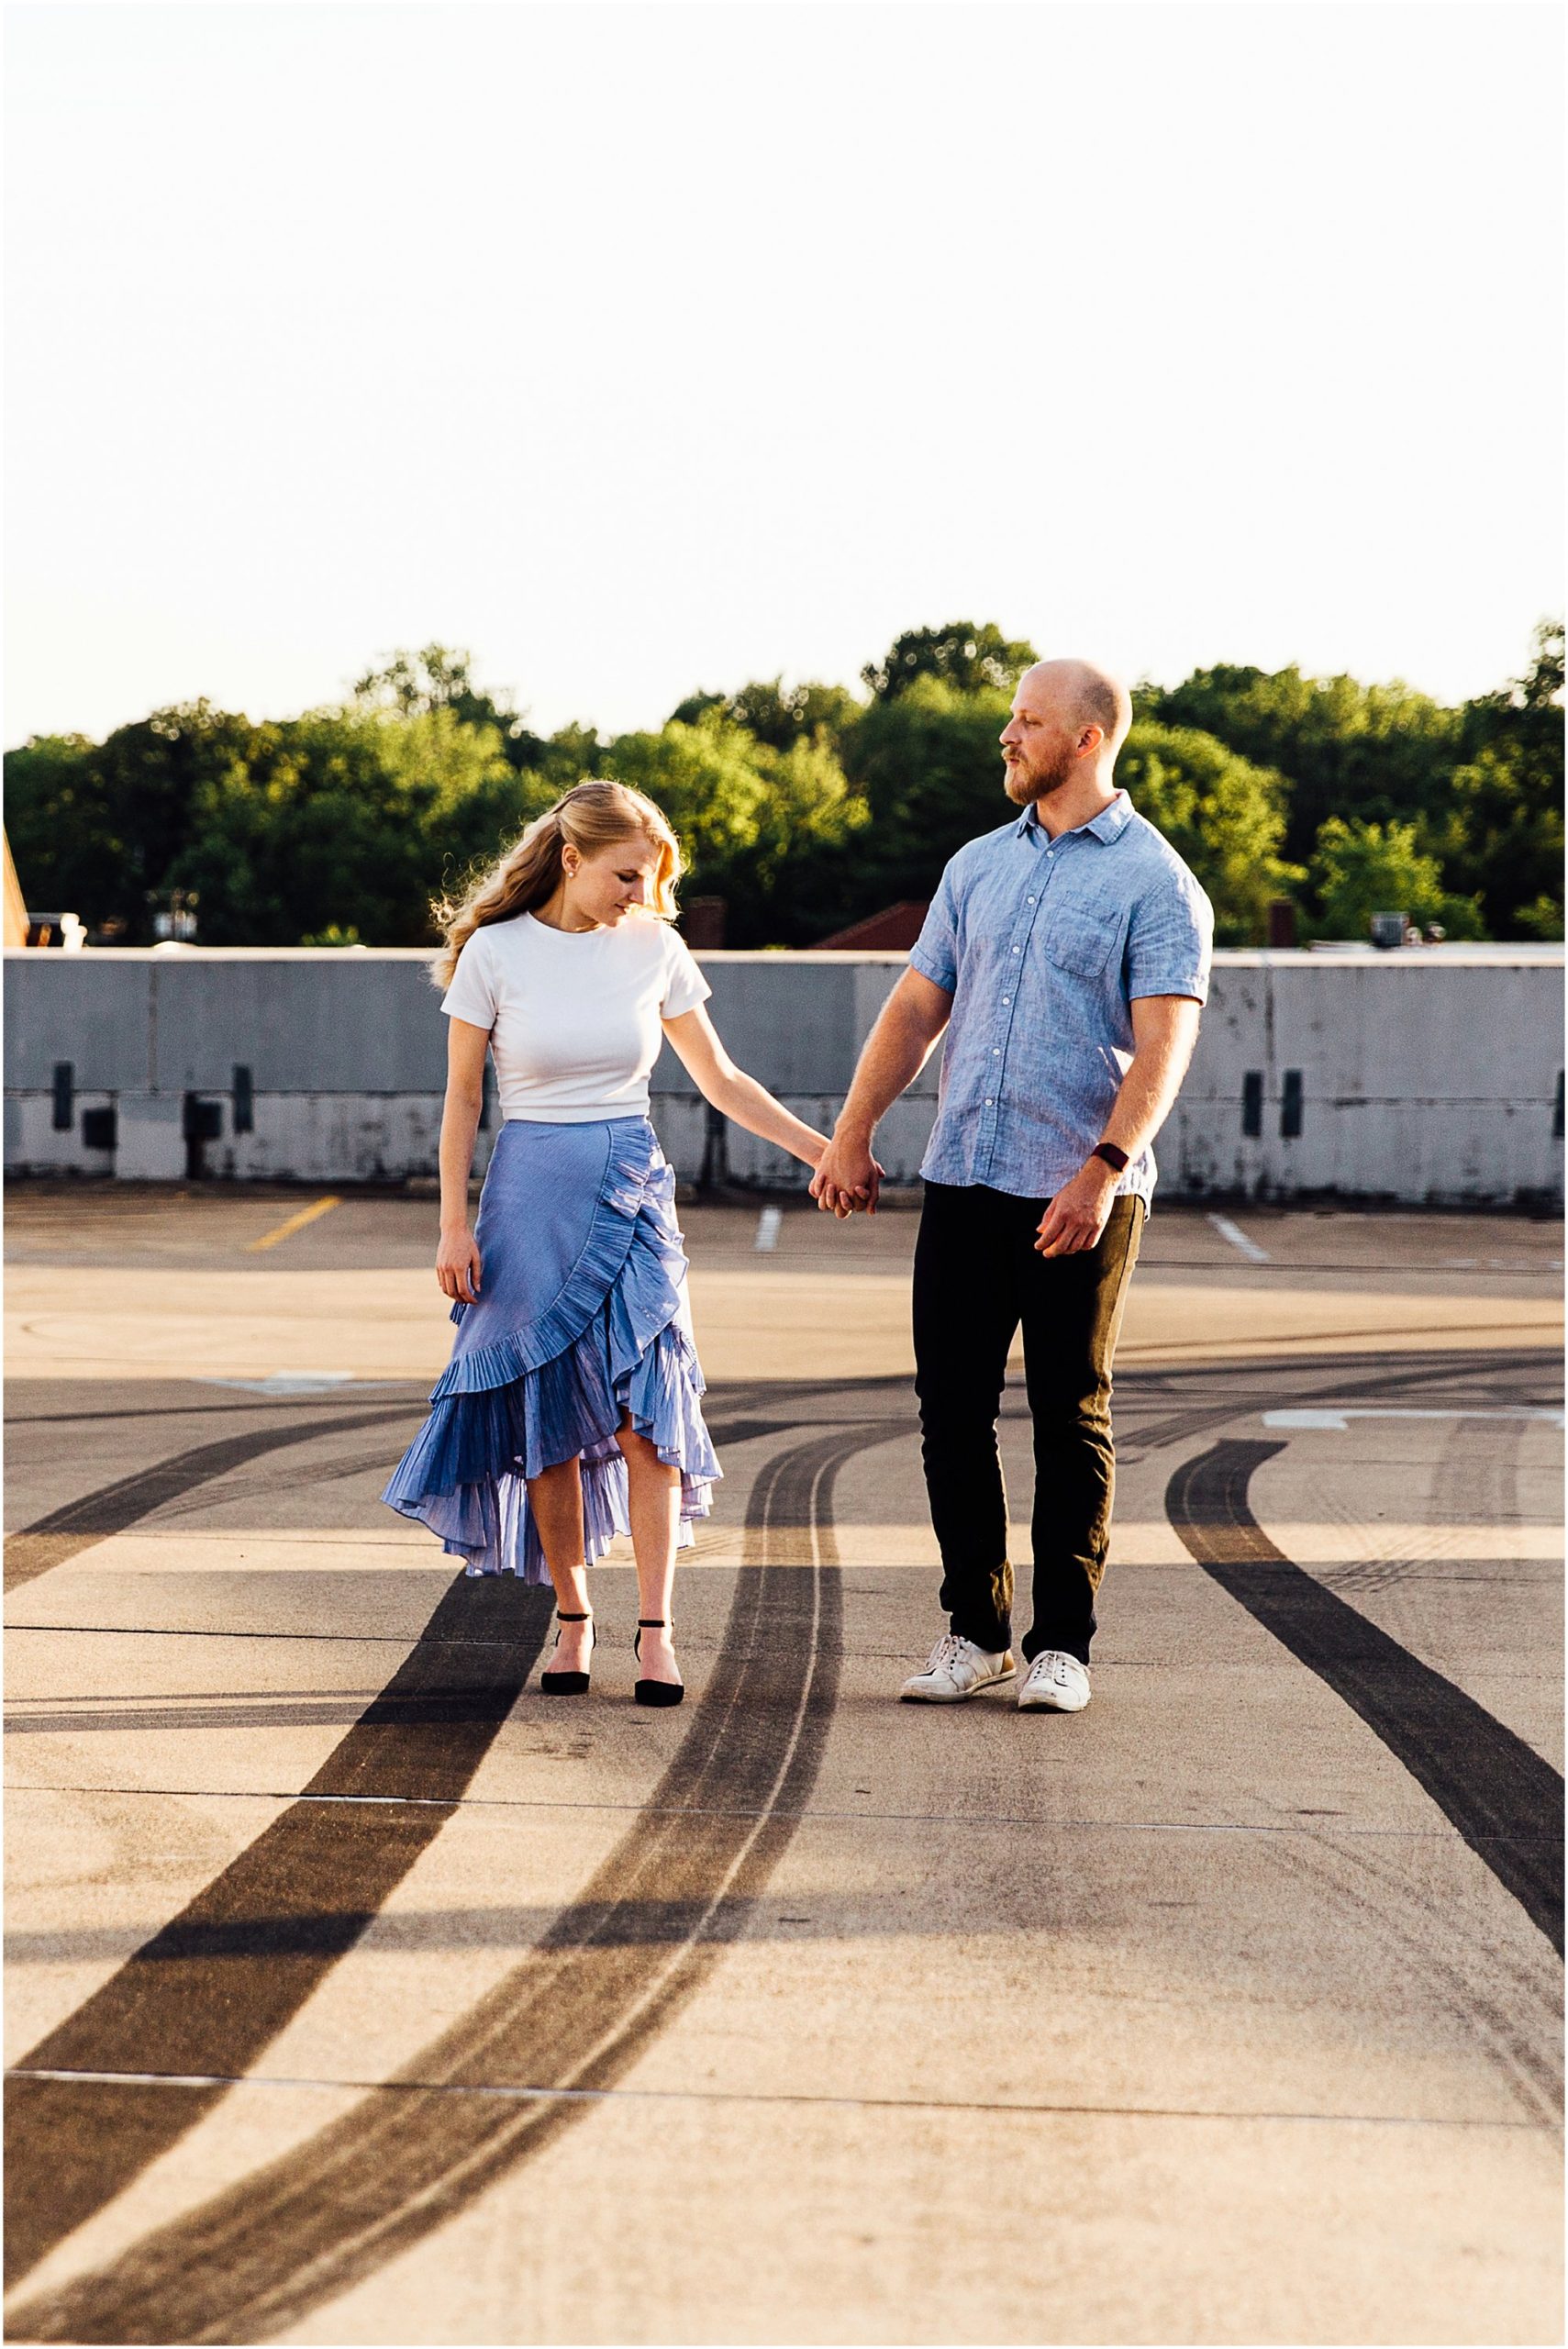 Engaged couple running on parking garage towards camera as they hold hands